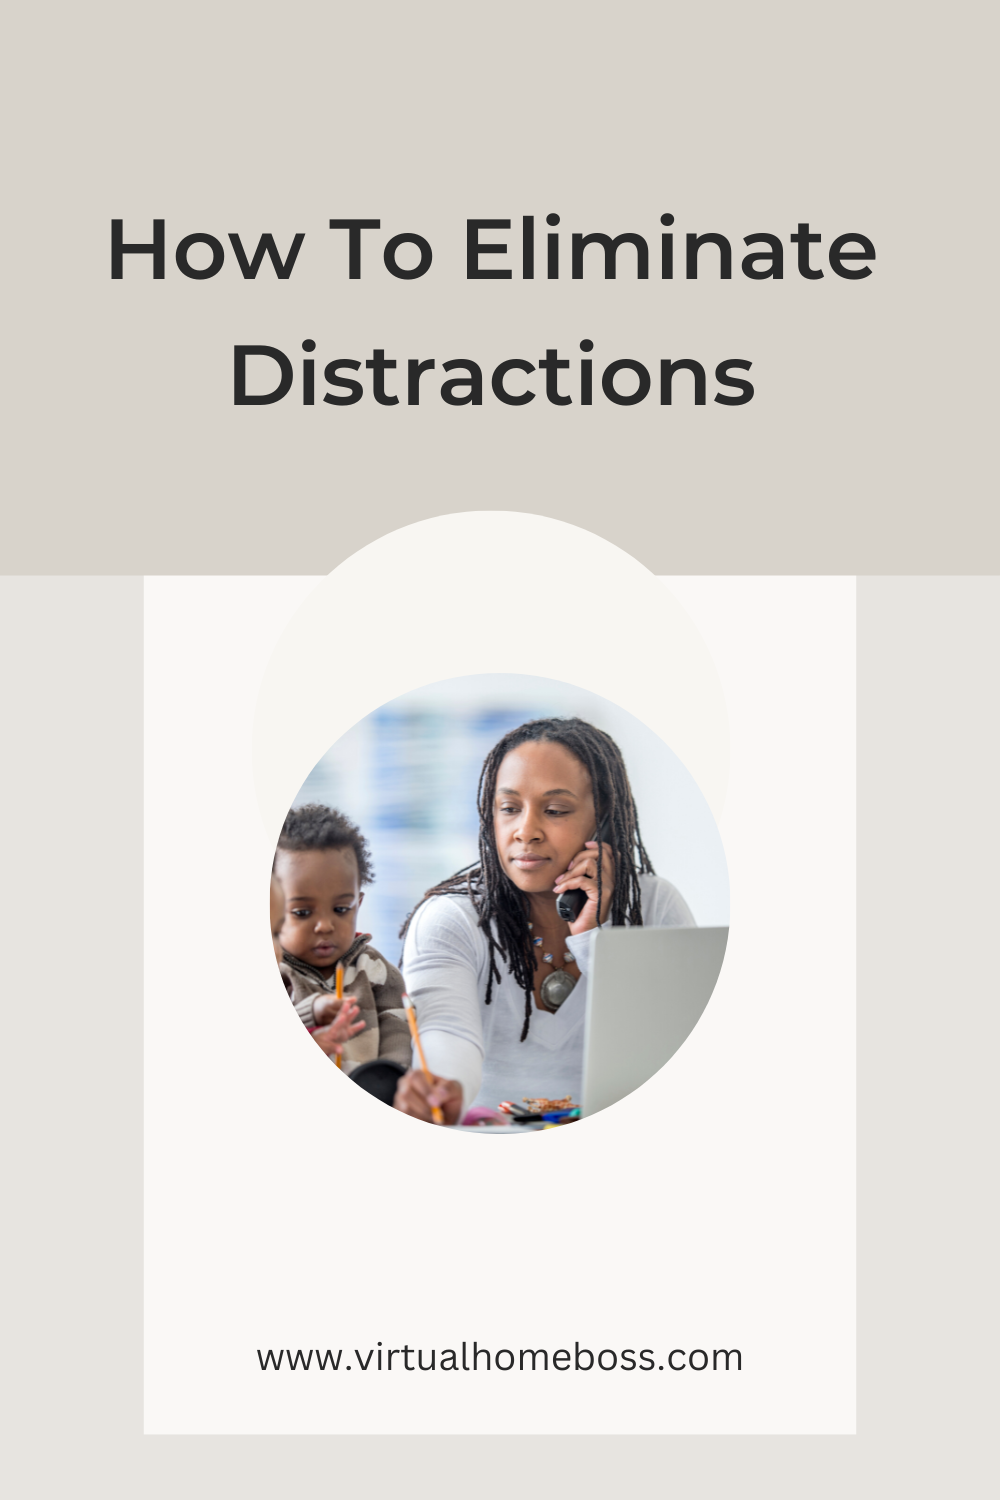 How To Eliminate Distractions